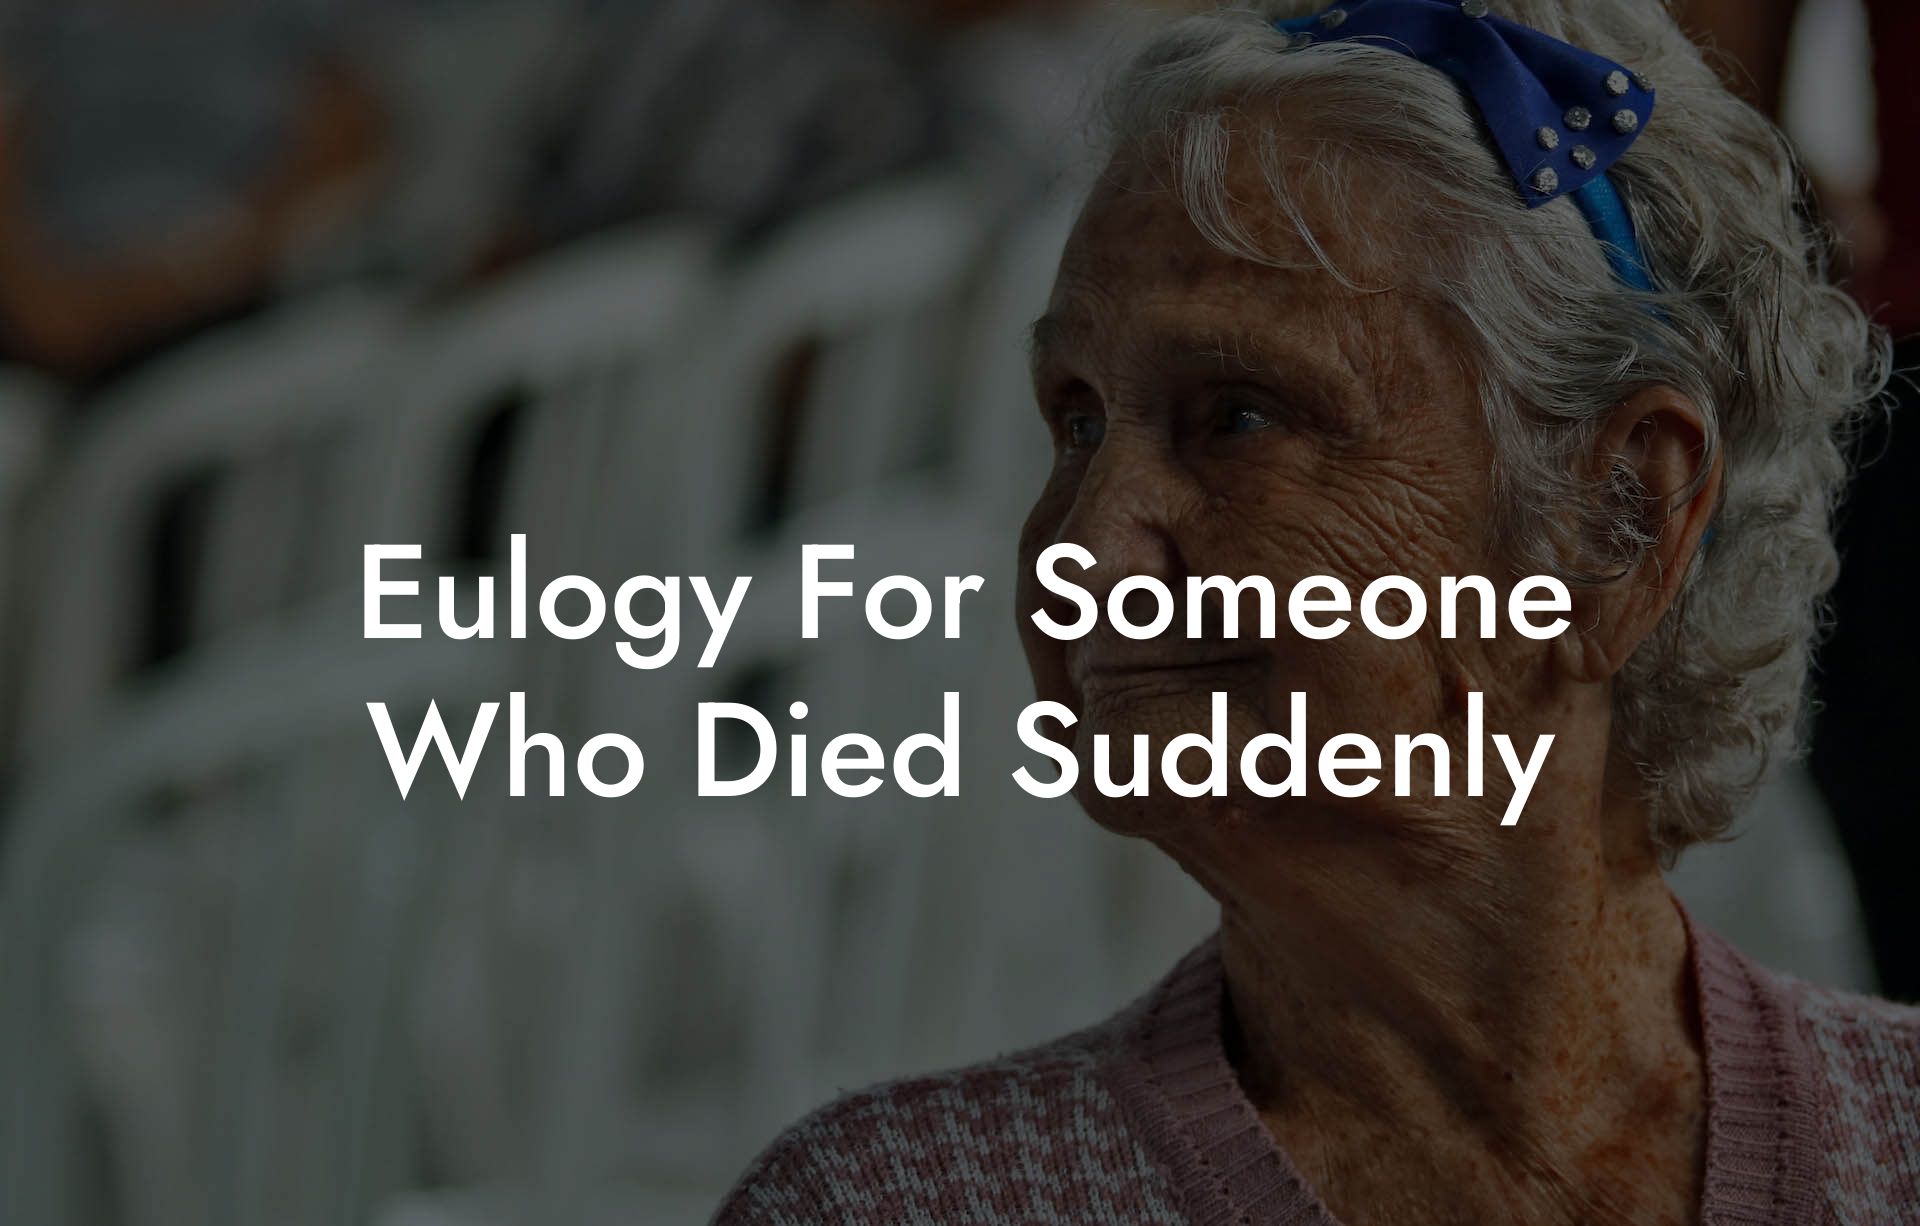 Eulogy For Someone Who Died Suddenly